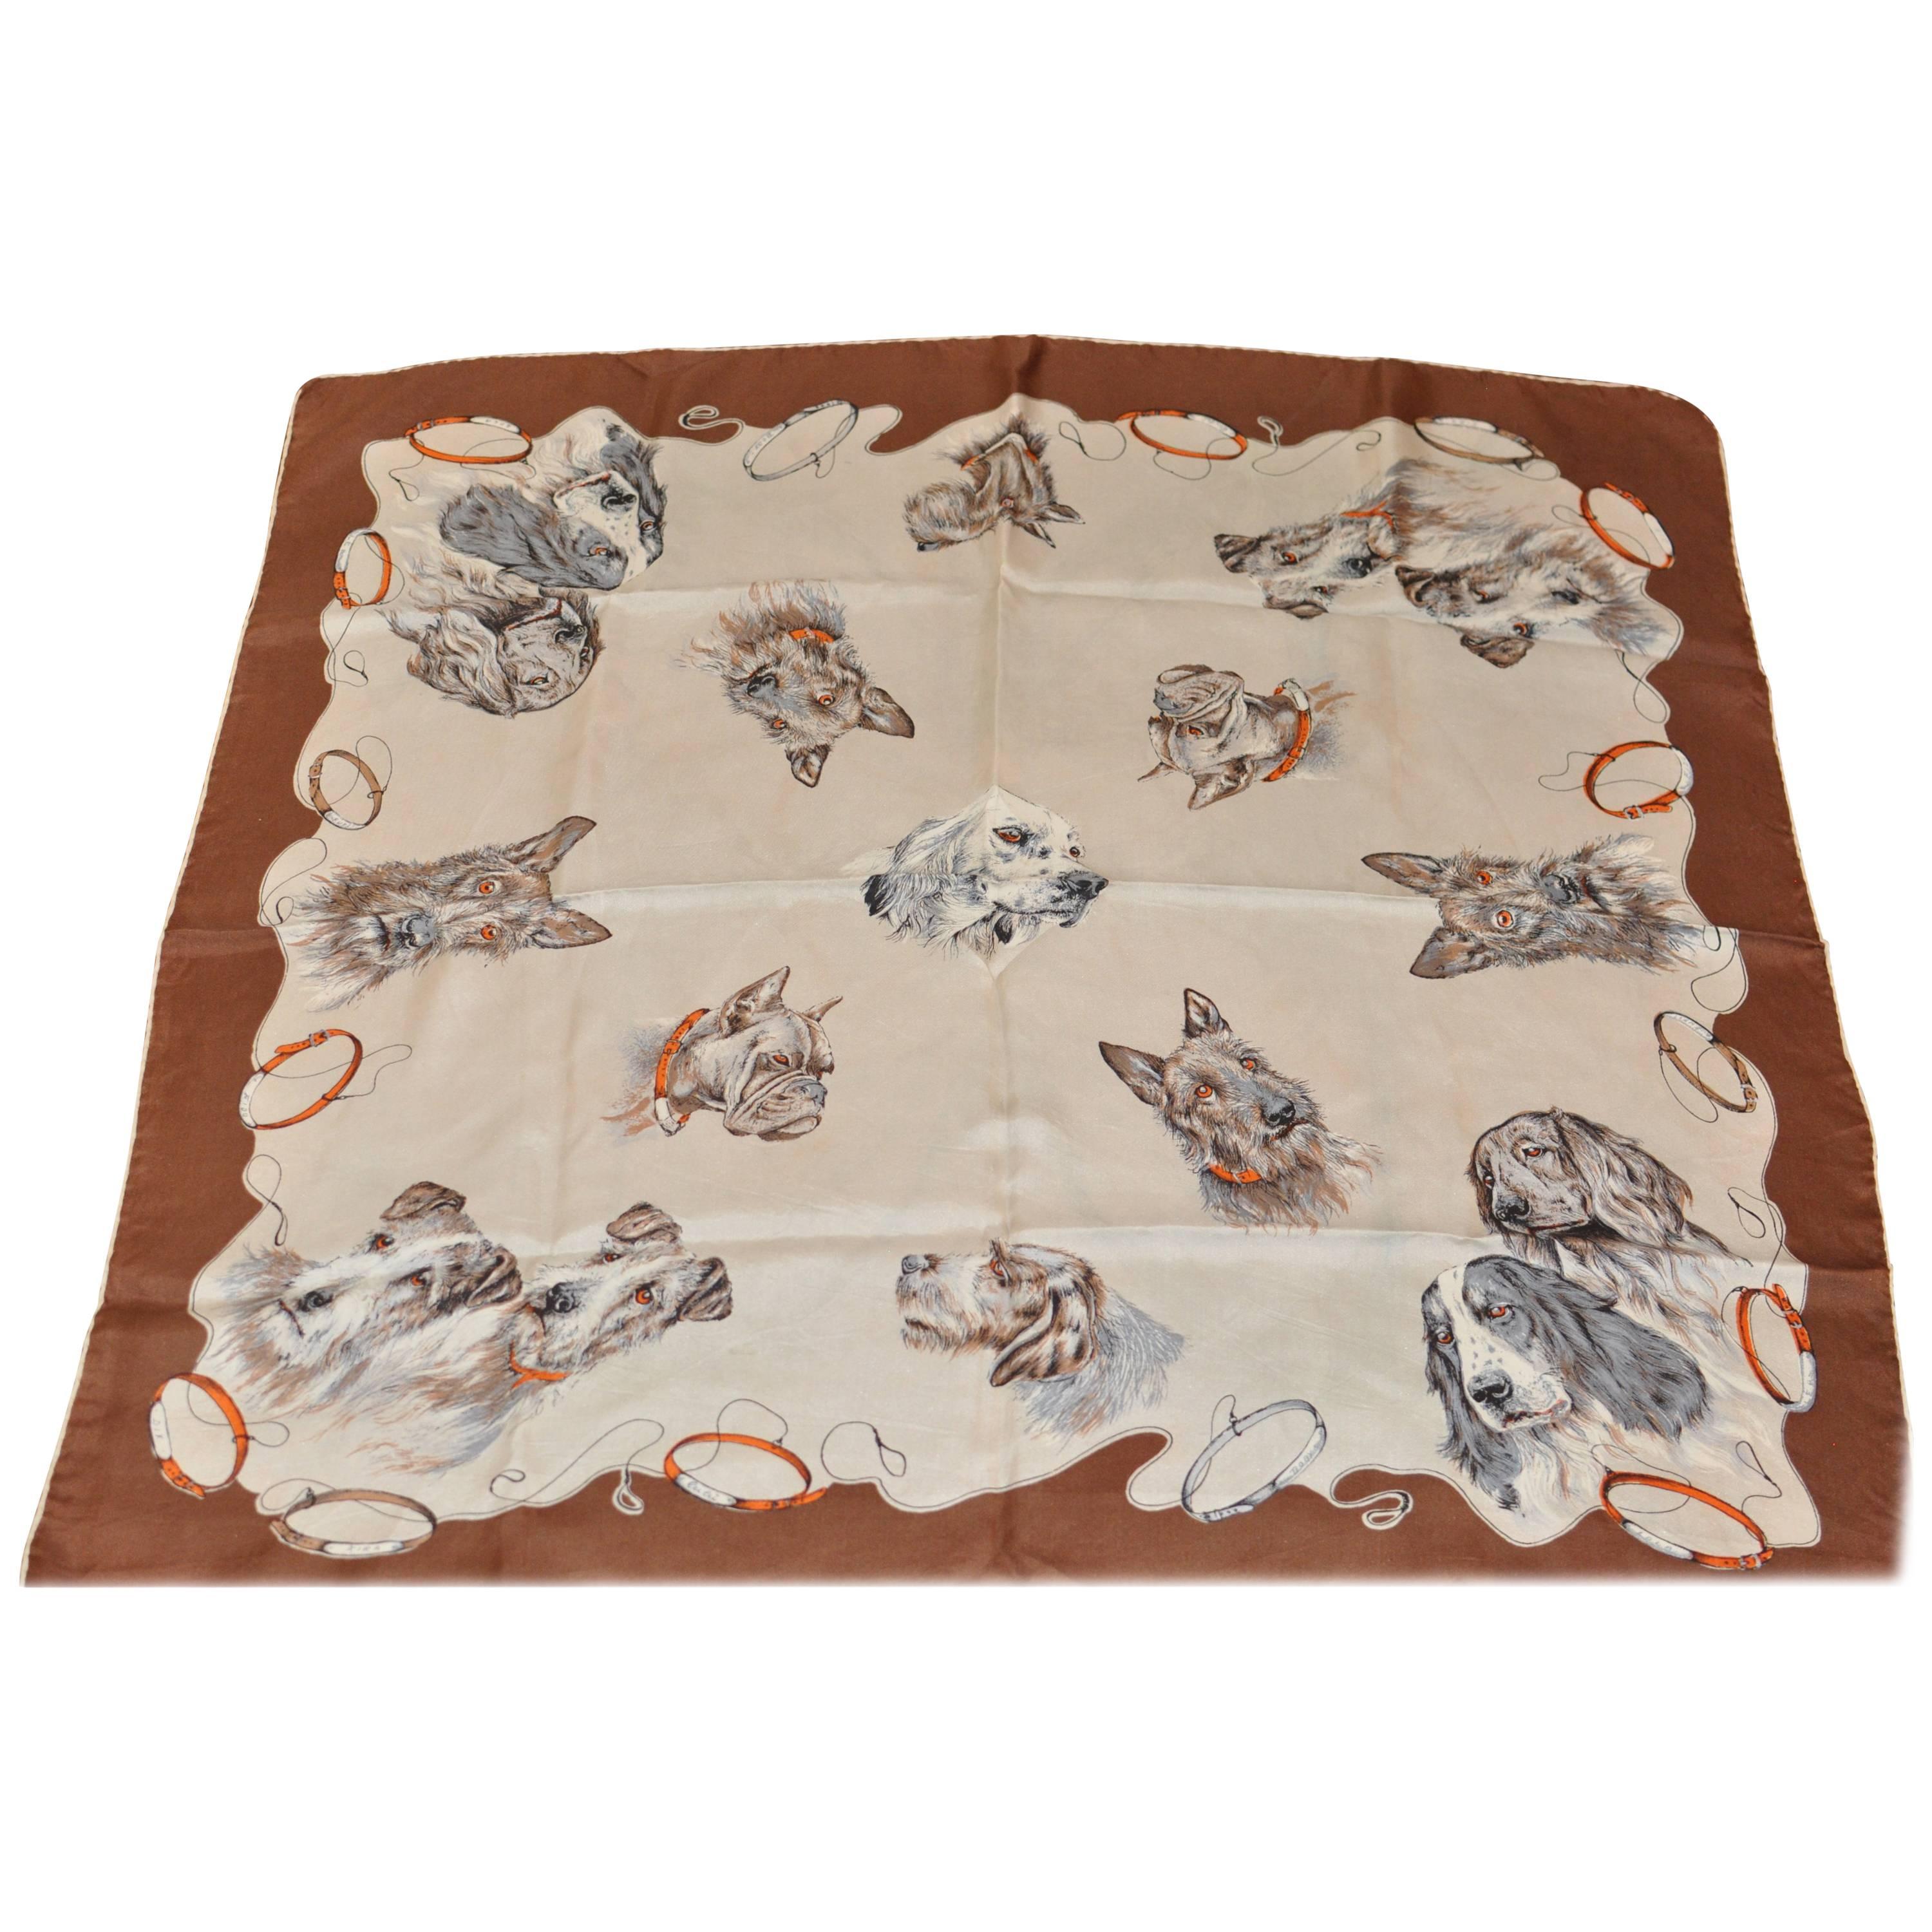 Dog Lover's Silk Scarf 30" x 30.5" with Rolled Hem